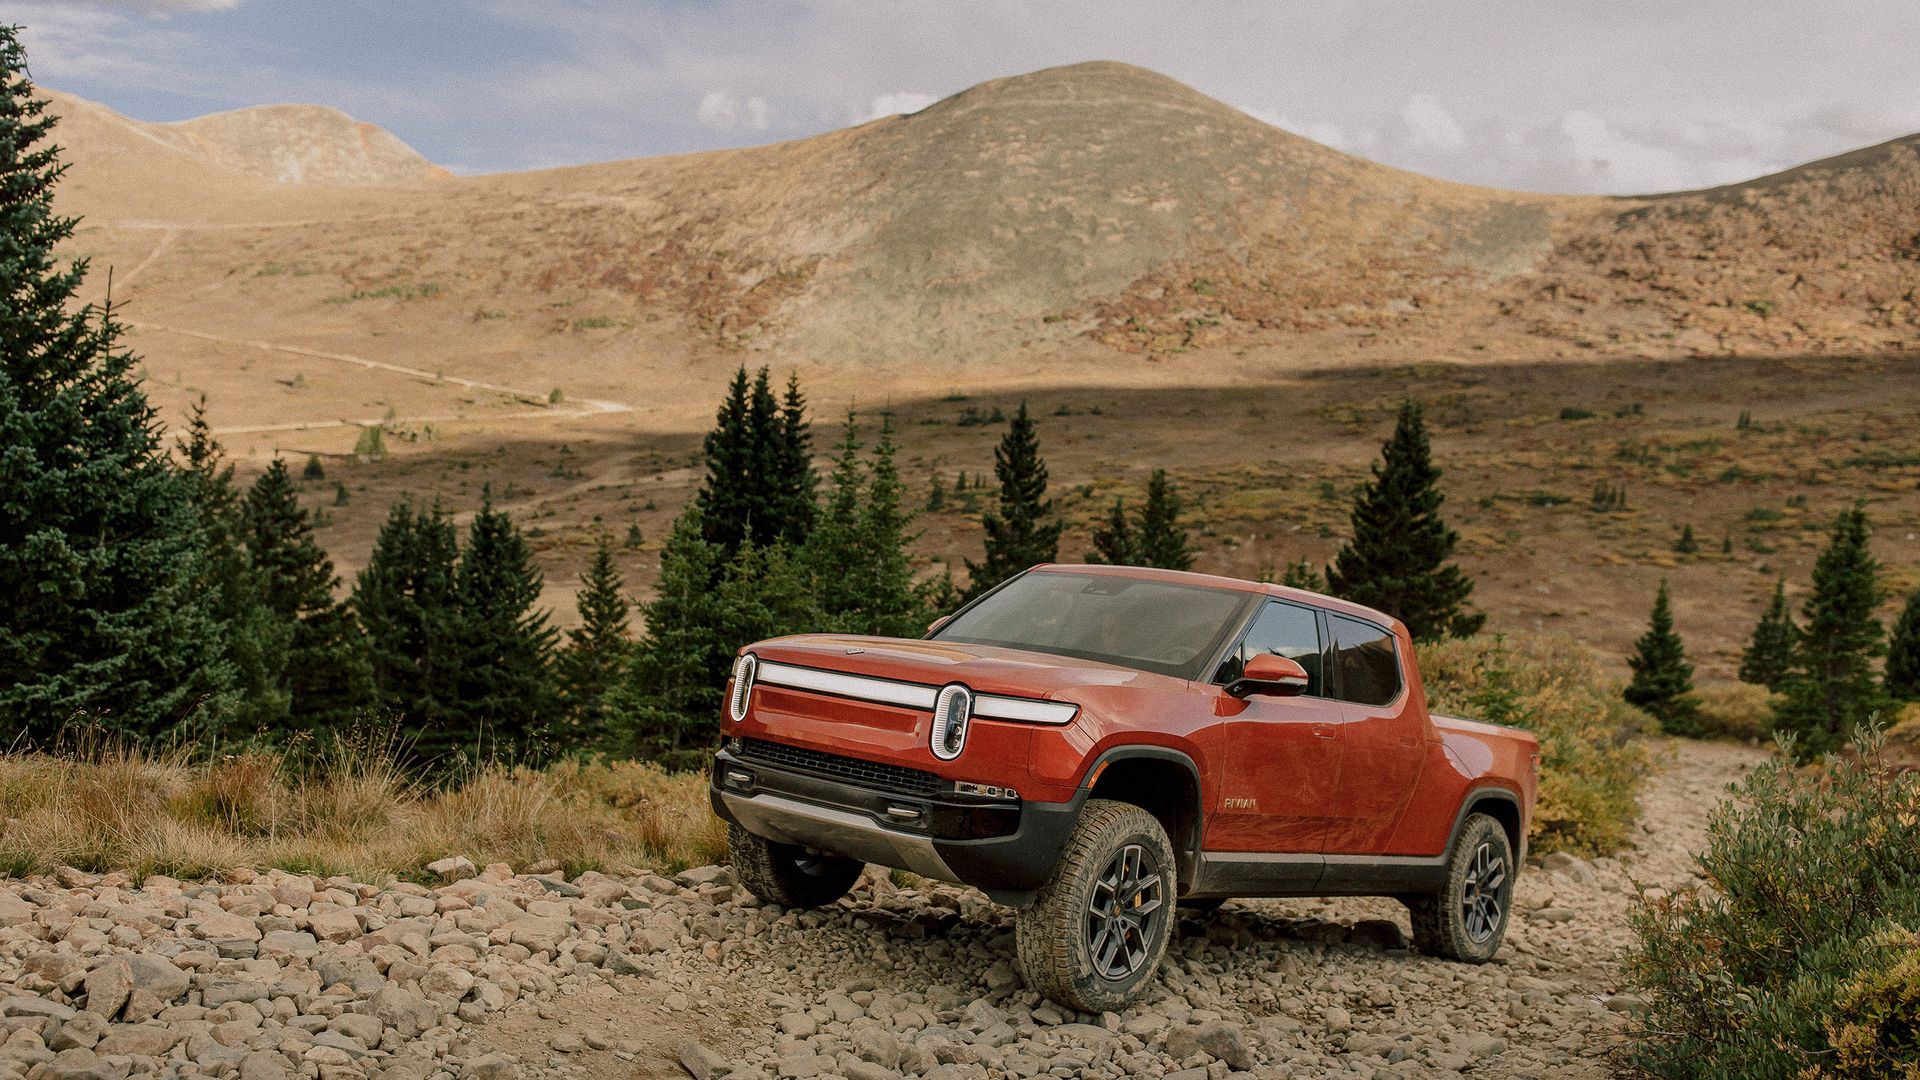 Image of a red Rivian electric pickup truck in a dusty mountain environment